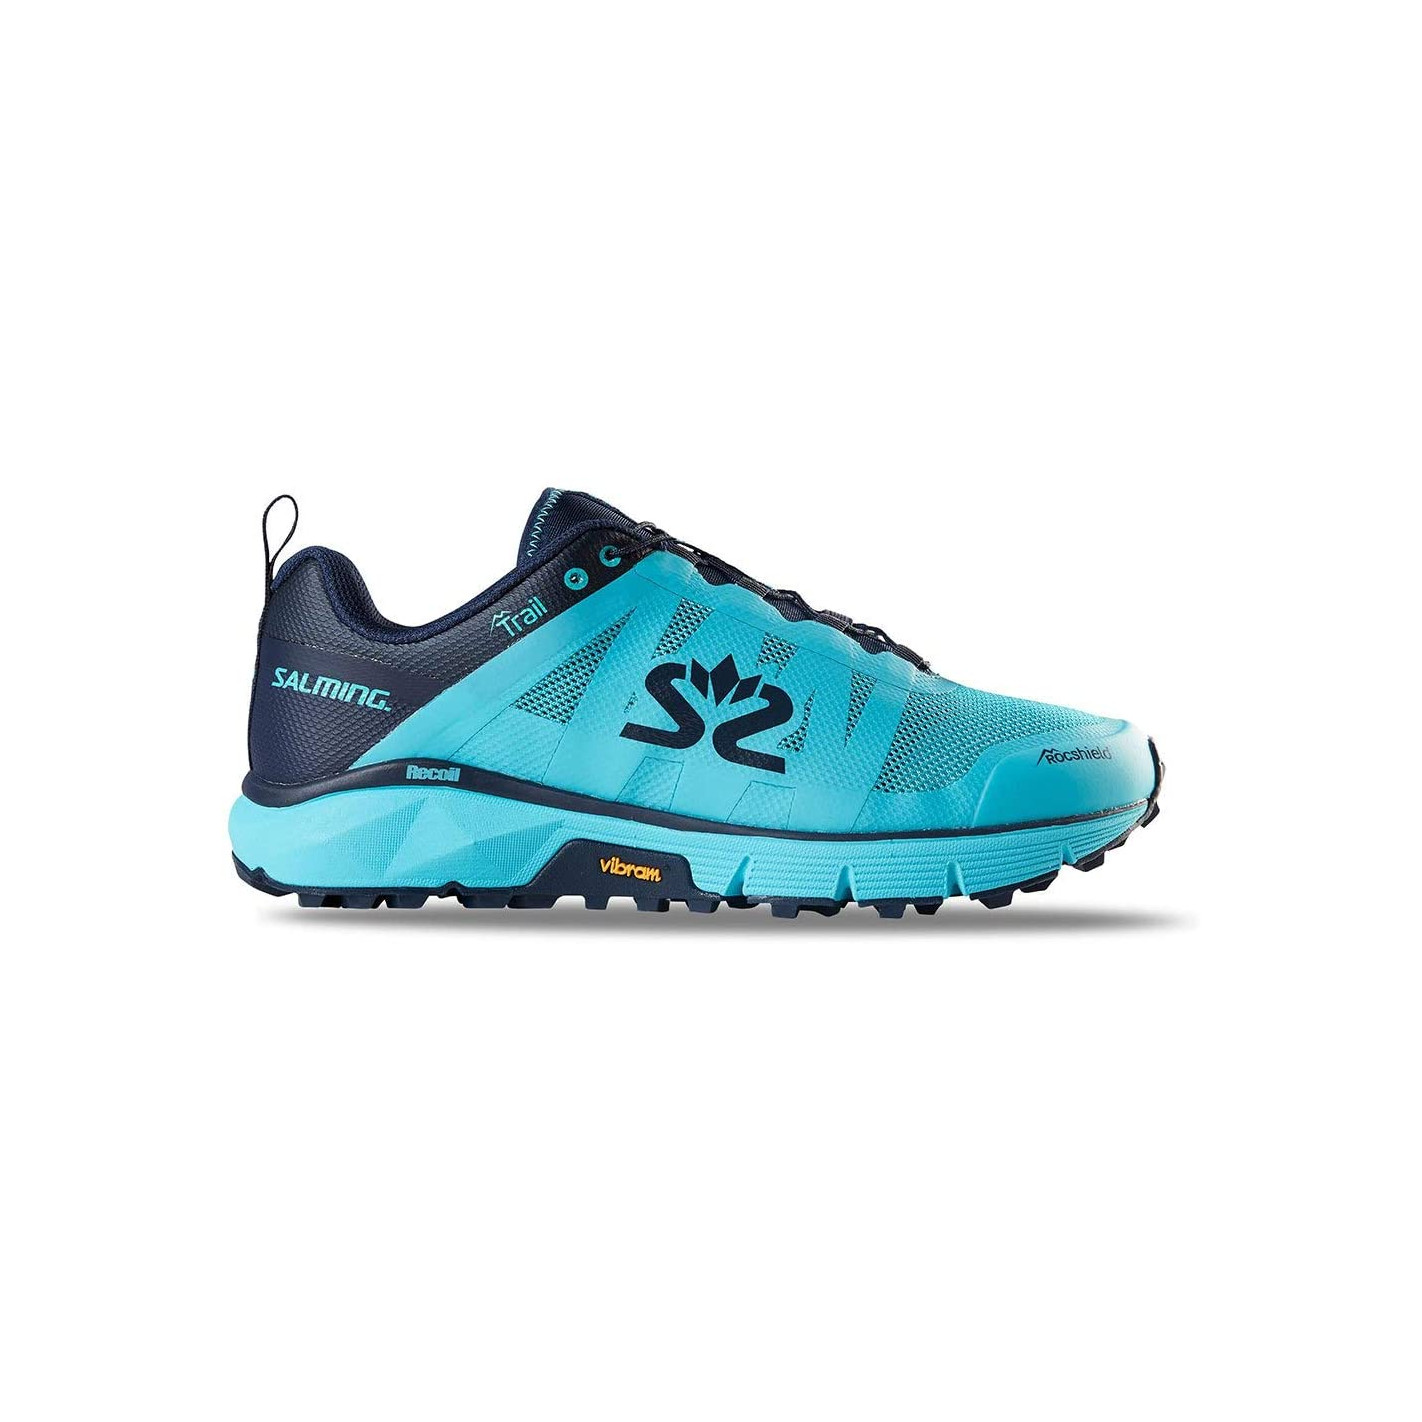 Chaussures trail femme, basket trail running pour femme